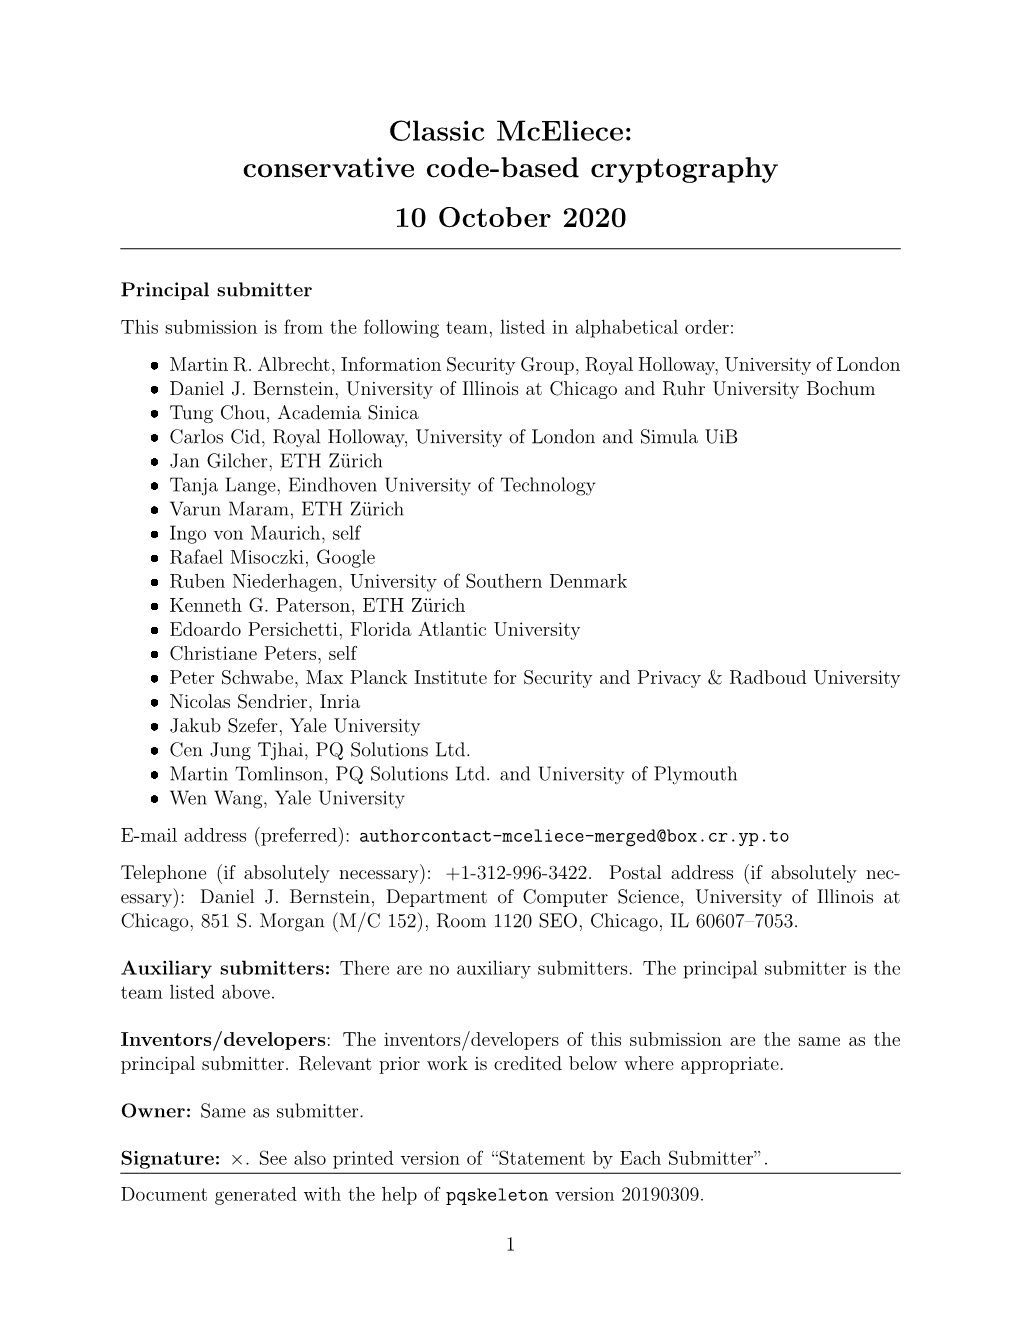 Conservative Code-Based Cryptography 10 October 2020